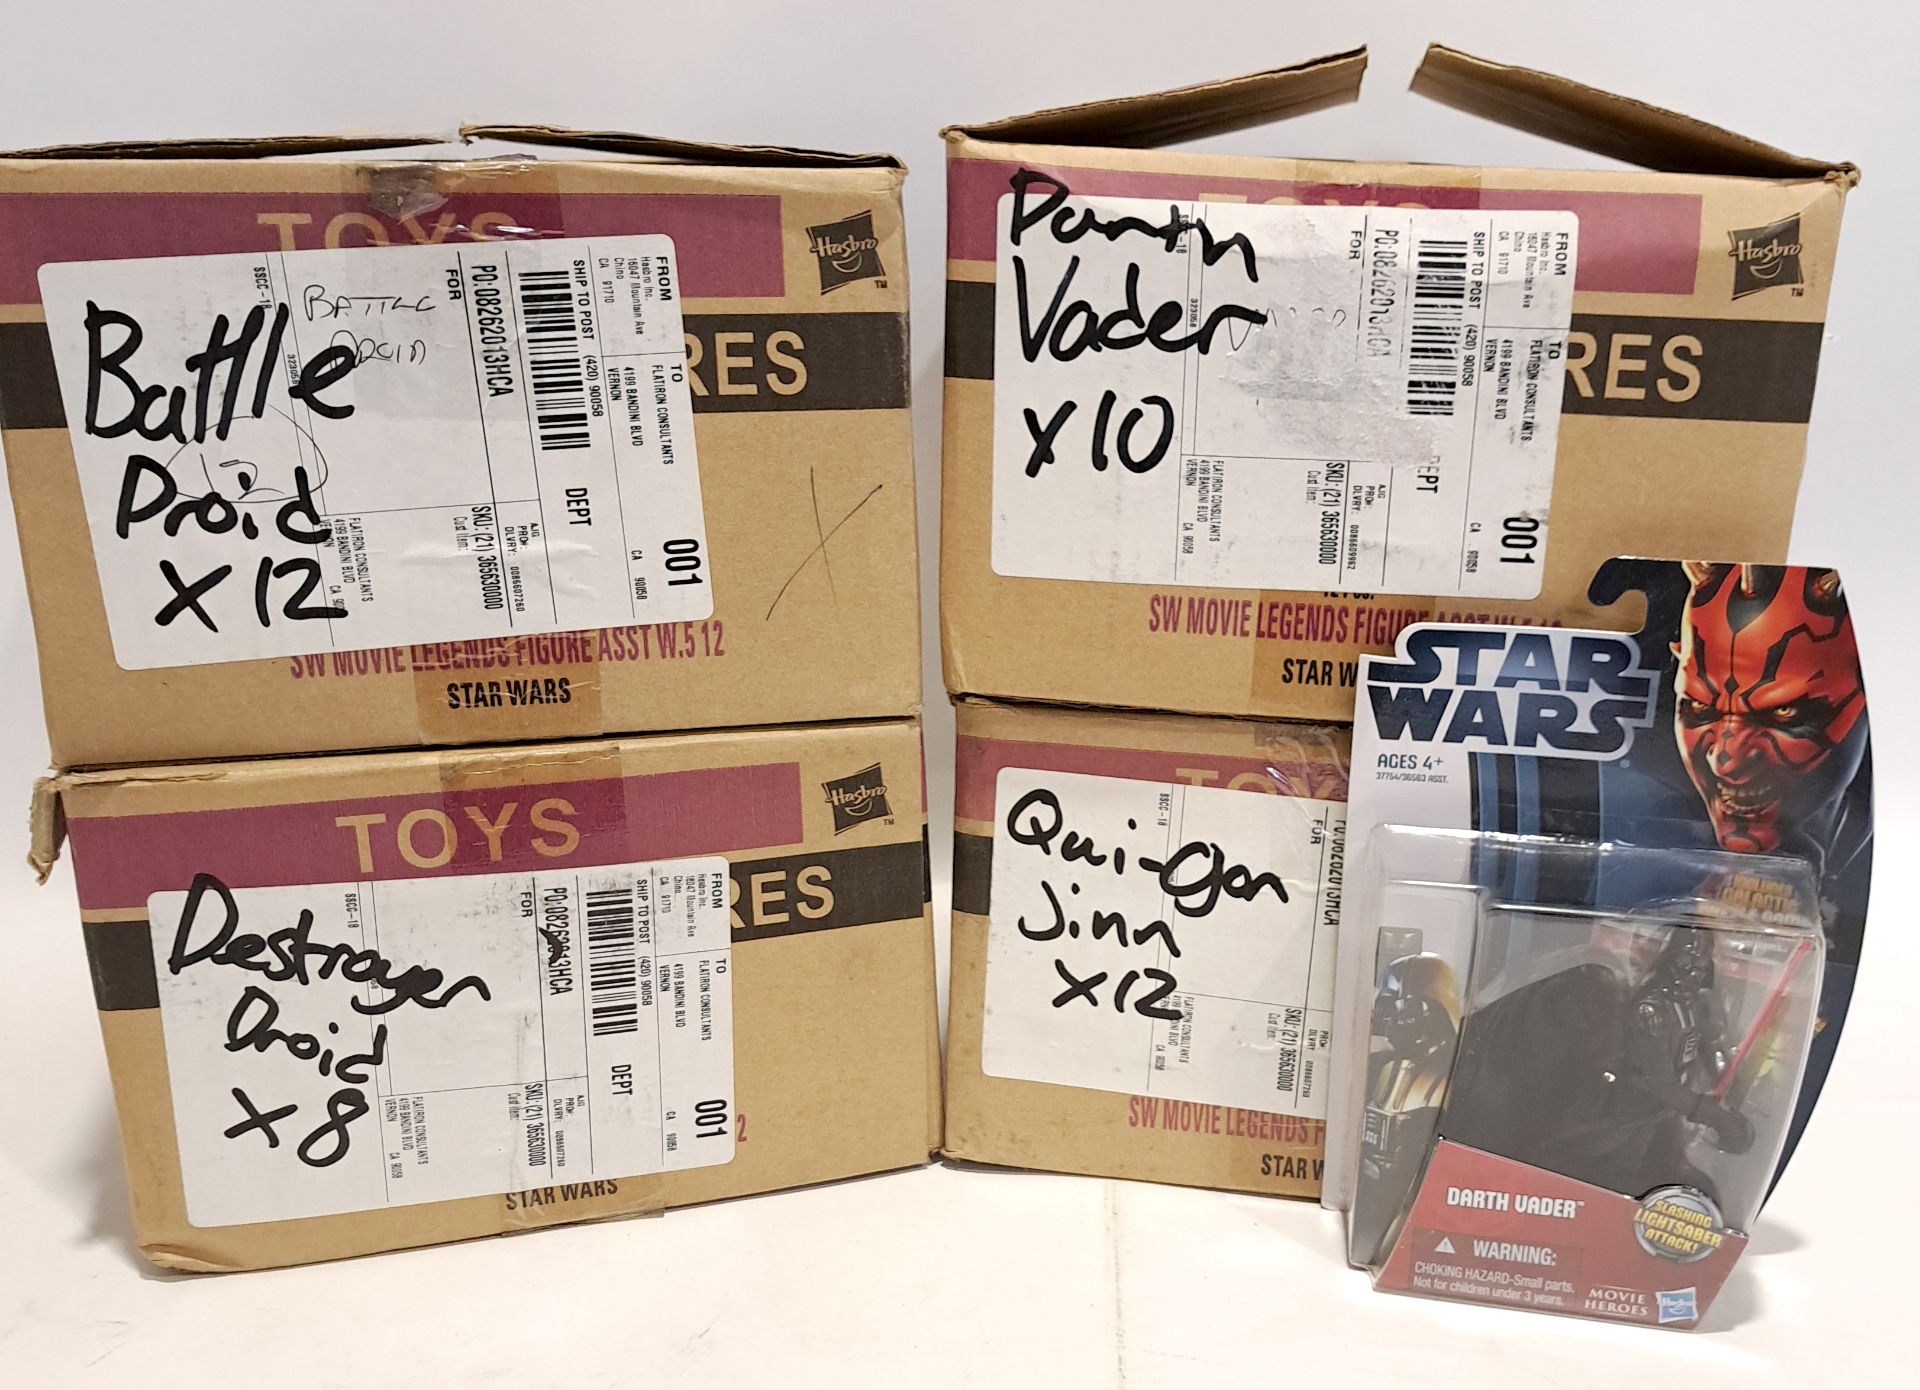 Hasbro Star Wars Movie Legends Action Figures within Trade Boxes x4 